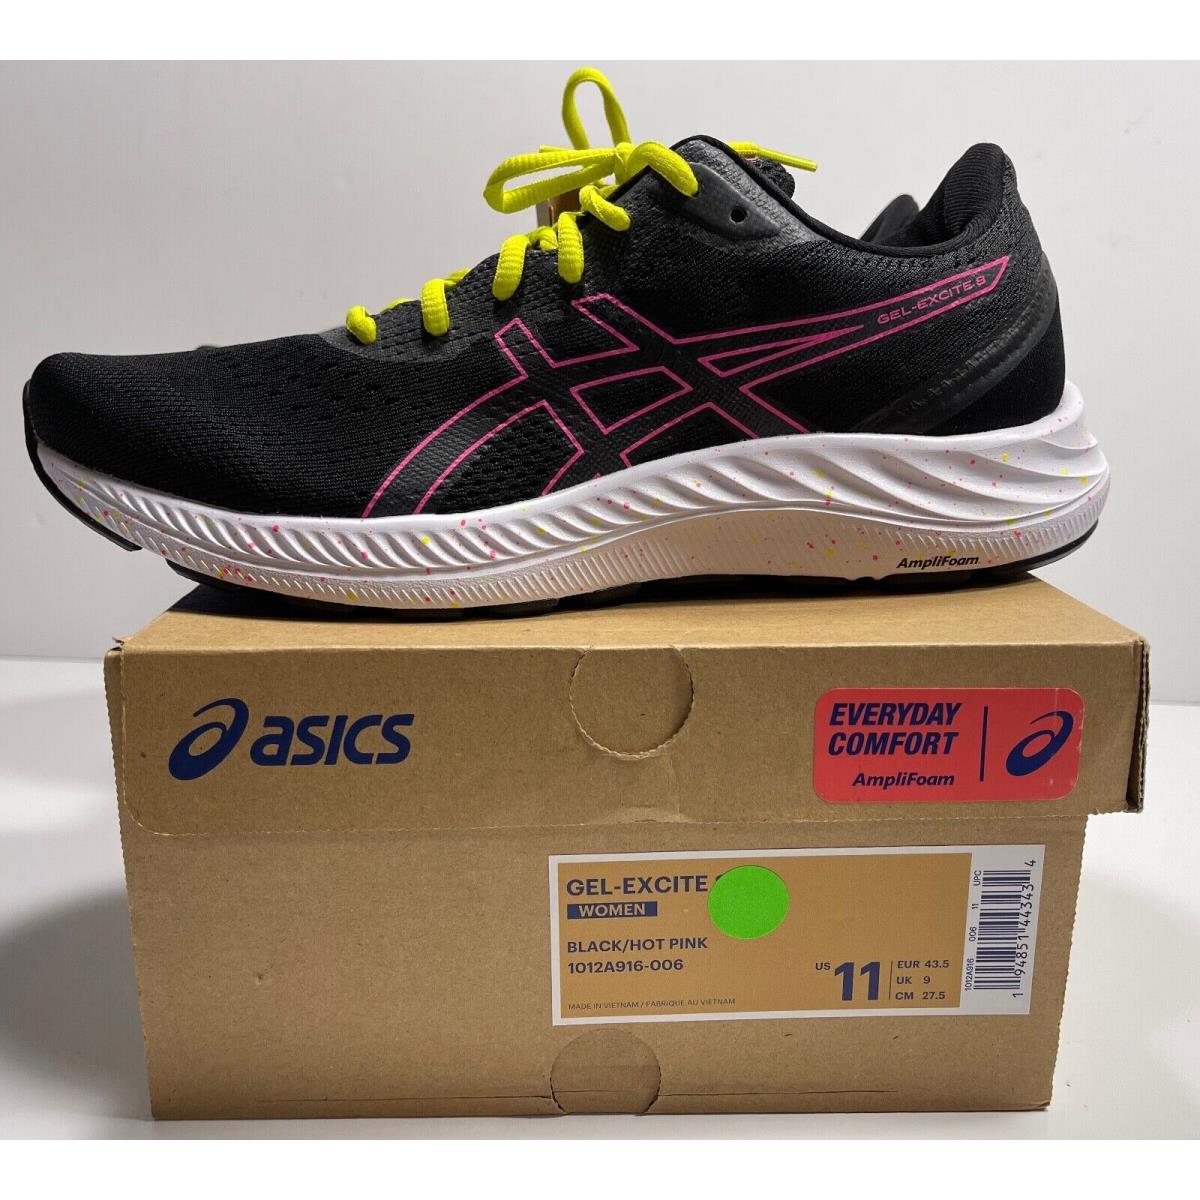 Asics Gel Excite 8 Black Hot Pink Women`s Running Shoes 1012A916-006 Size 11